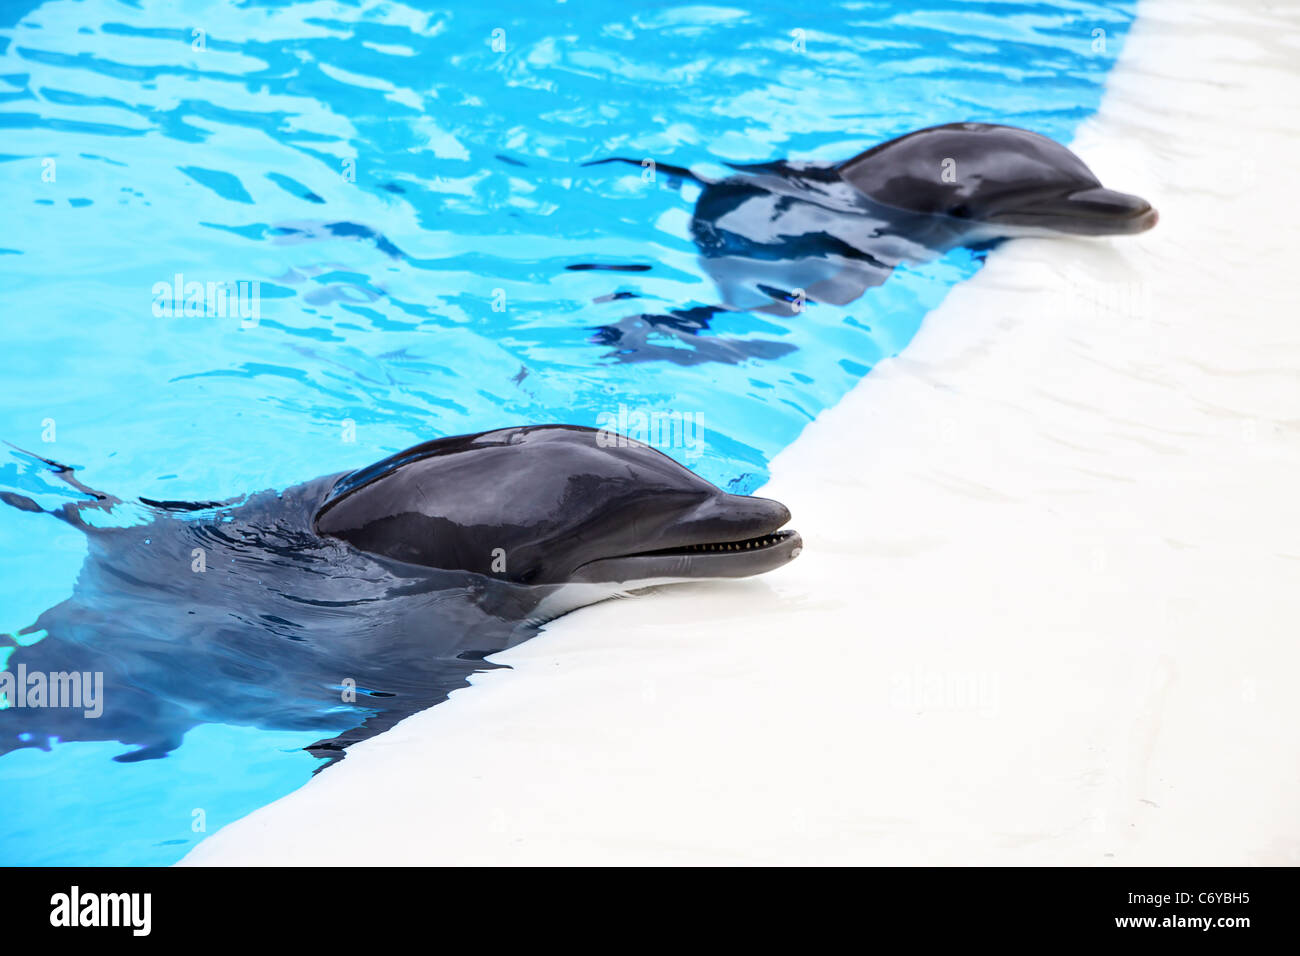 Two dolphins near the edge of pool Stock Photo